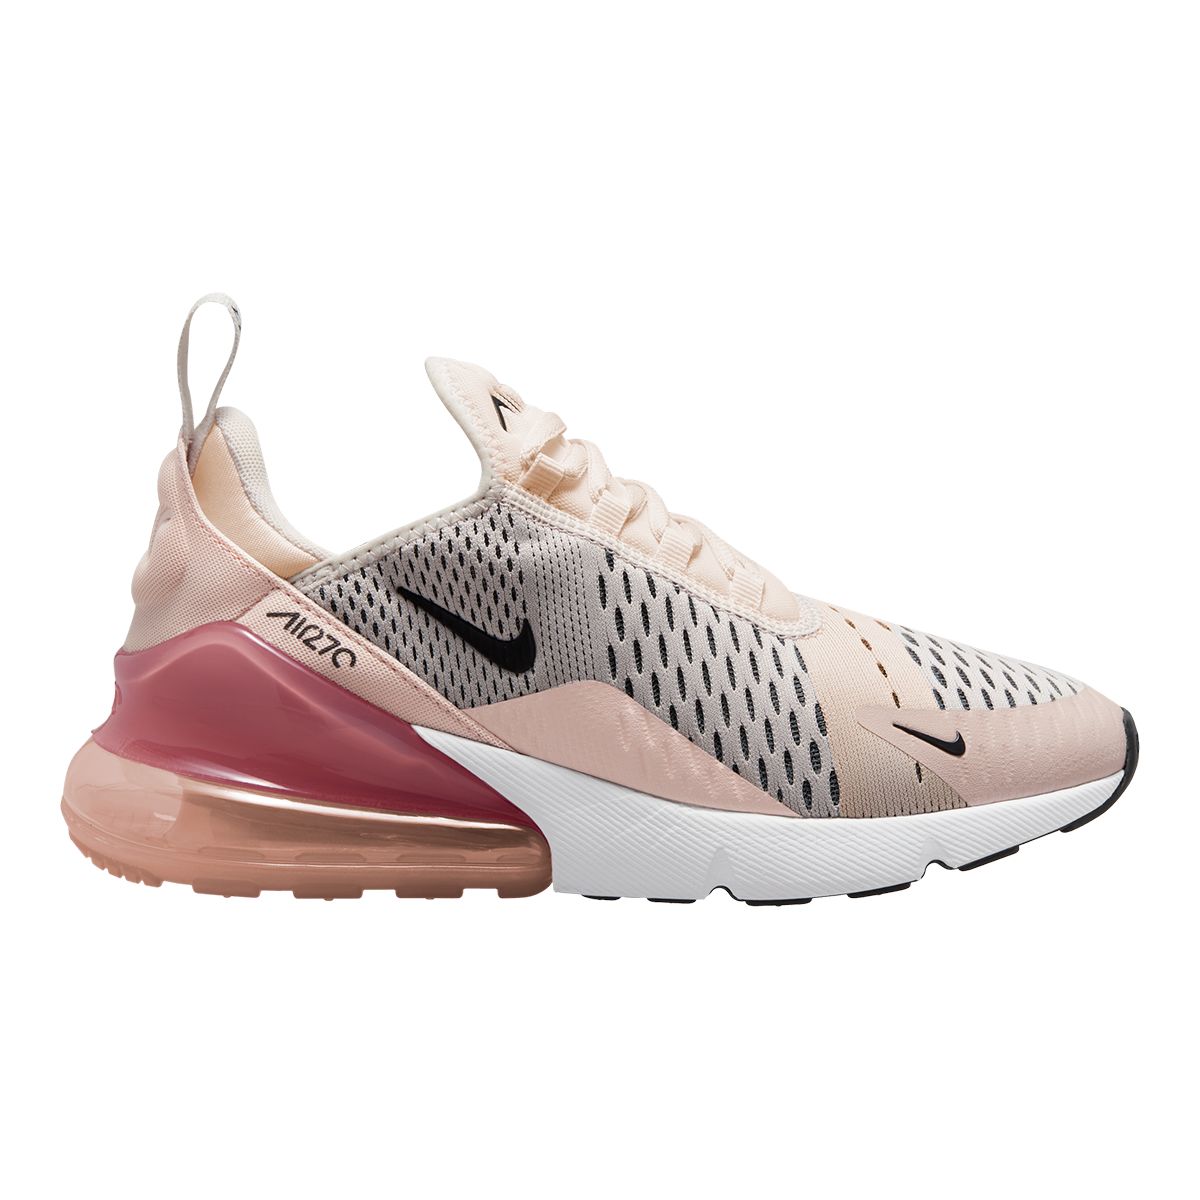 Image of Nike Women's Air Max 270 Shoes Sneakers Cushioned